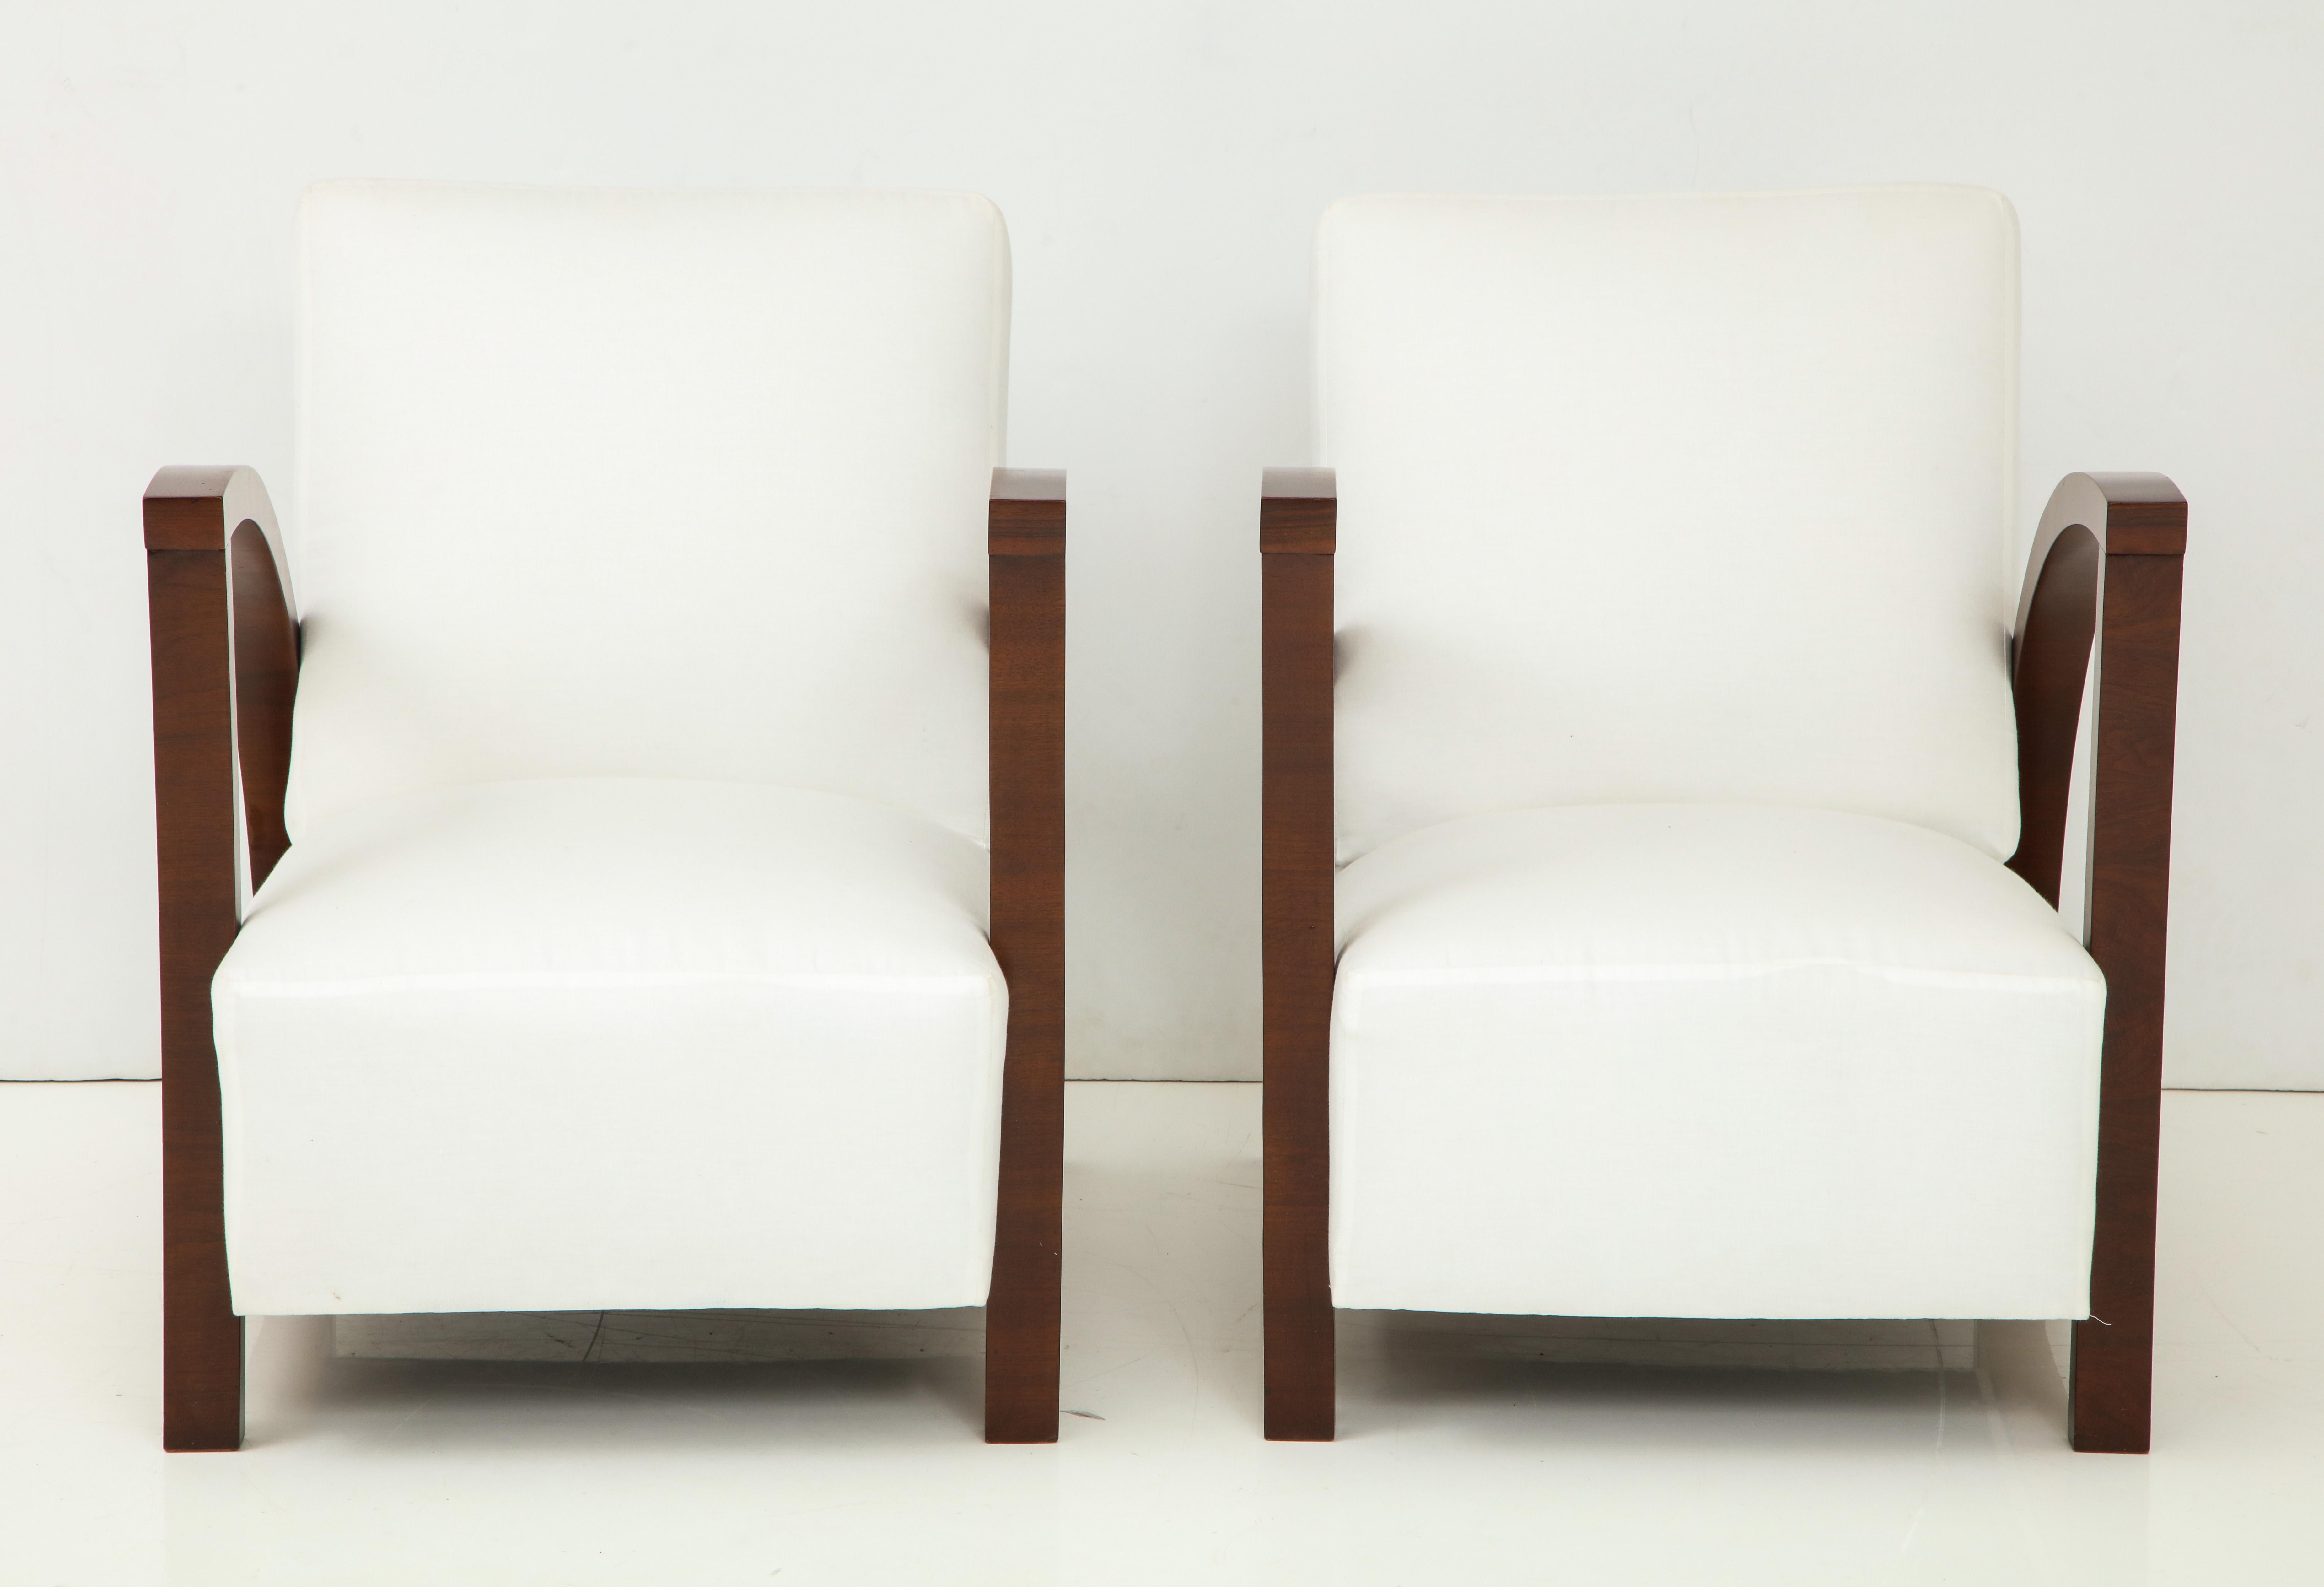 Pair of 20th century teak wood armchairs with flat-front arms.